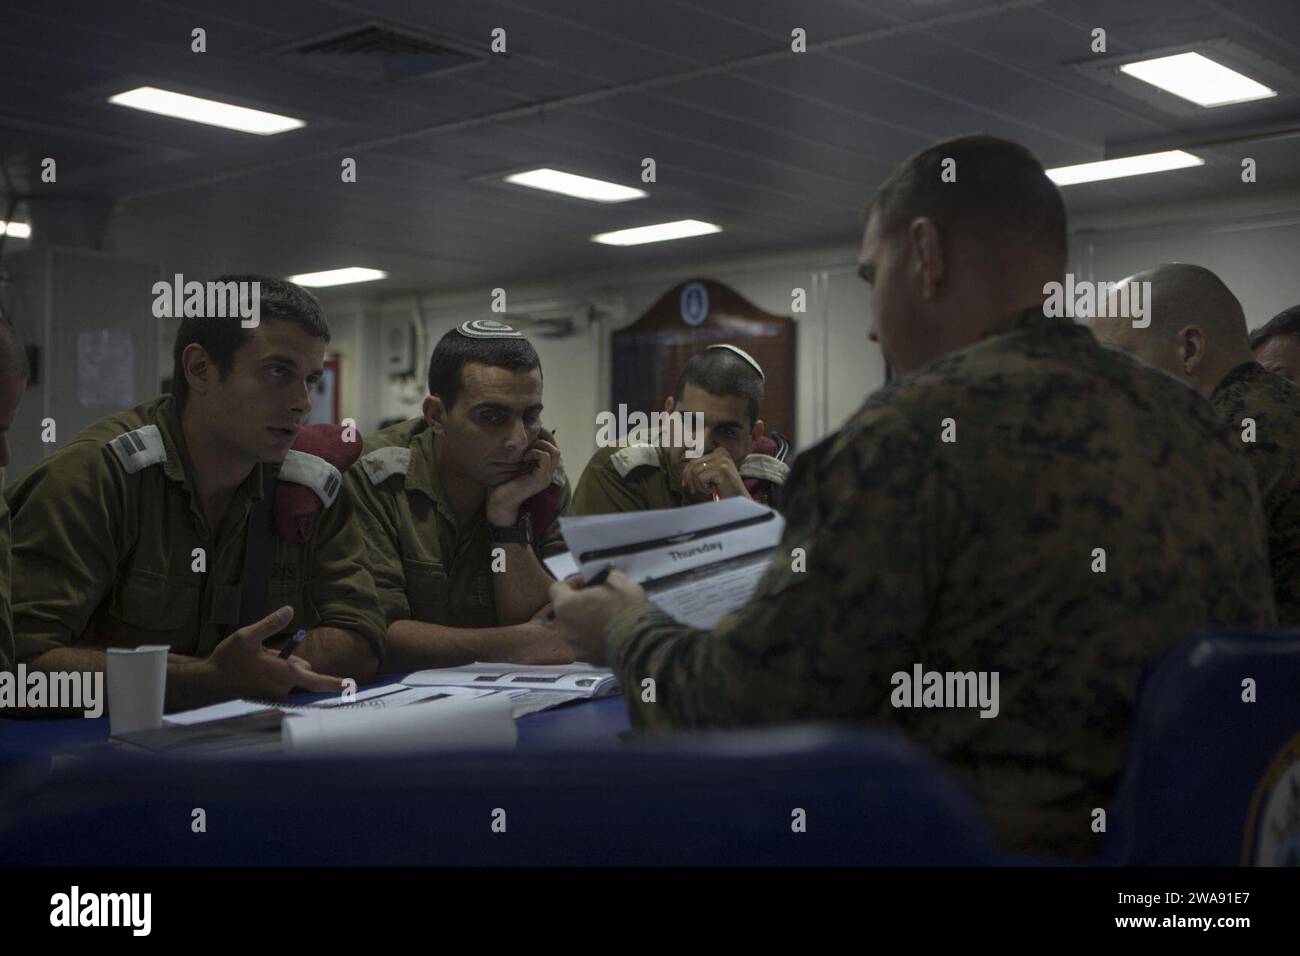 US military forces. 180306IZ659-0007 MEDITERRANEAN SEA (Mar. 6, 2018) U.S. Marine Corps leadership of Battalion Landing Team, 2nd Battalion, 6th Marine Regiment (BLT 2/6), 26th Marine Expeditionary Unit (MEU), discuss details about the upcoming bilateral exercise Juniper Cobra with Israeli Defense Force (IDF) soldiers aboard the Wasp-class amphibious assault ship USS Iwo Jima (LHD 7), Mar. 6, 2018. JC18 is a combined exercise designed to improve interoperability between US and Israeli forces. (U.S. Marine Corps photo by Cpl. Santino D. Martinez/Released) Stock Photo